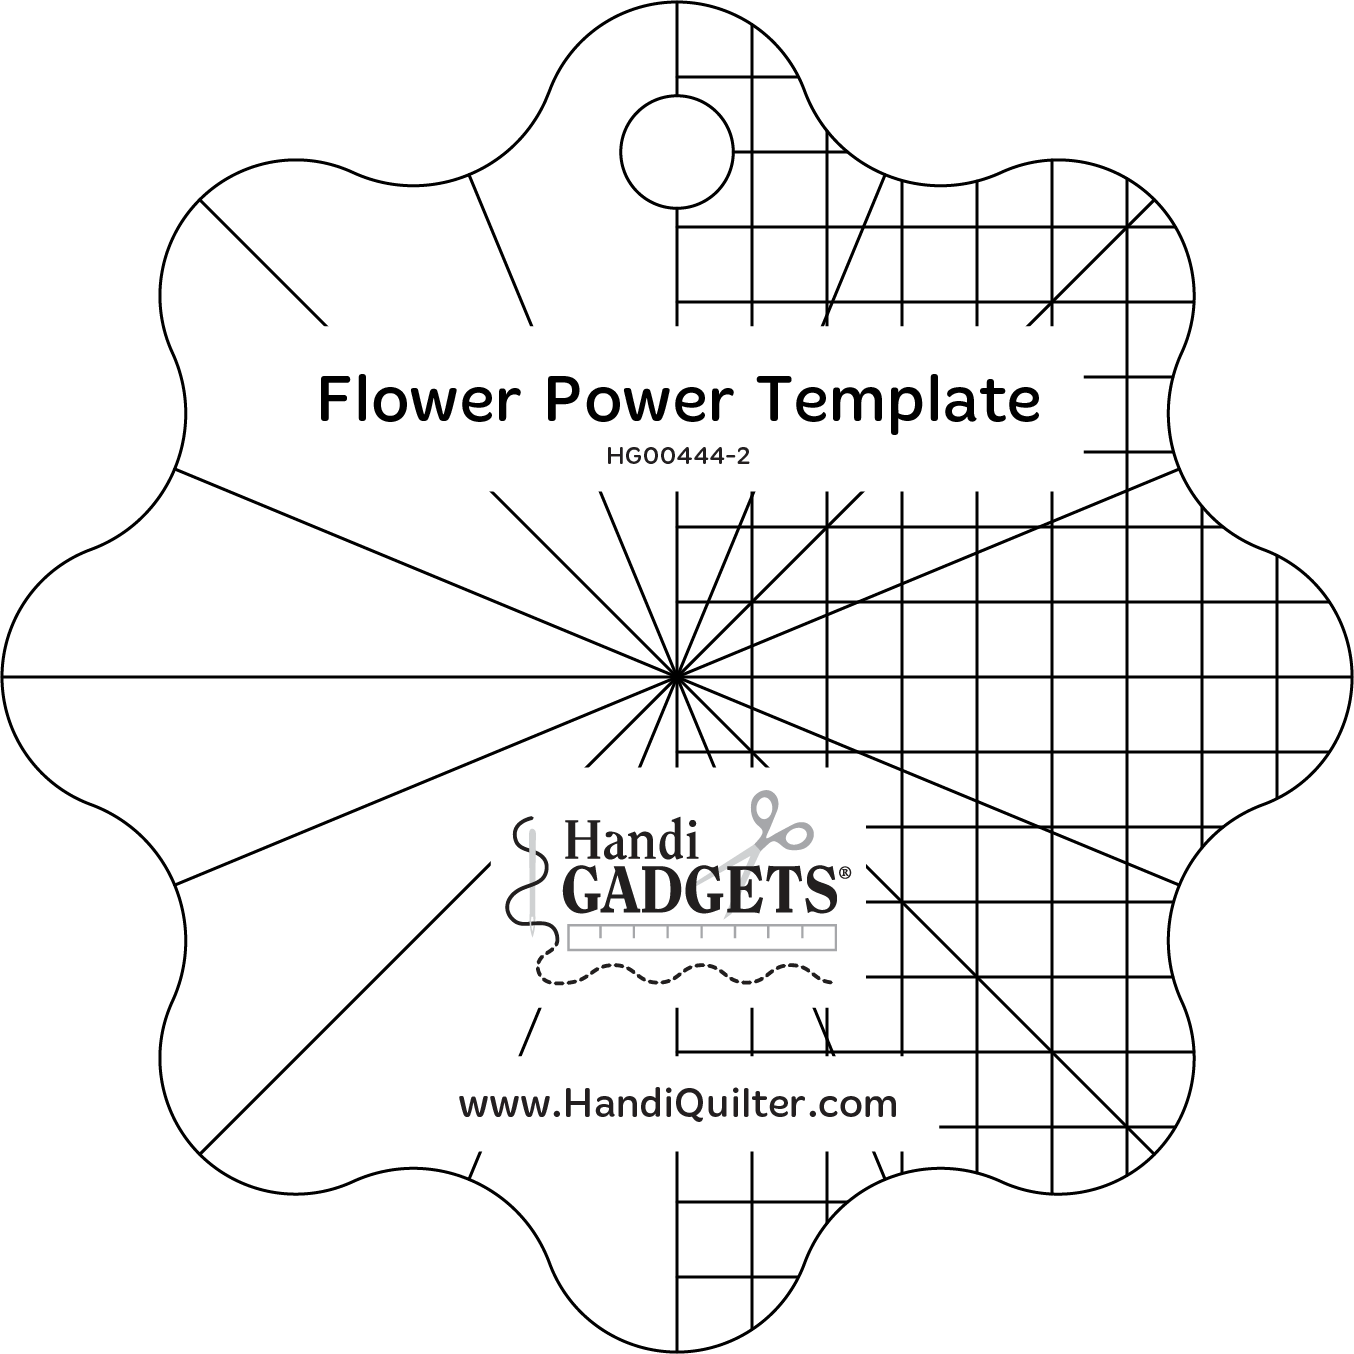 HQ 5-INCH FLOWER POWER TEMPLATE